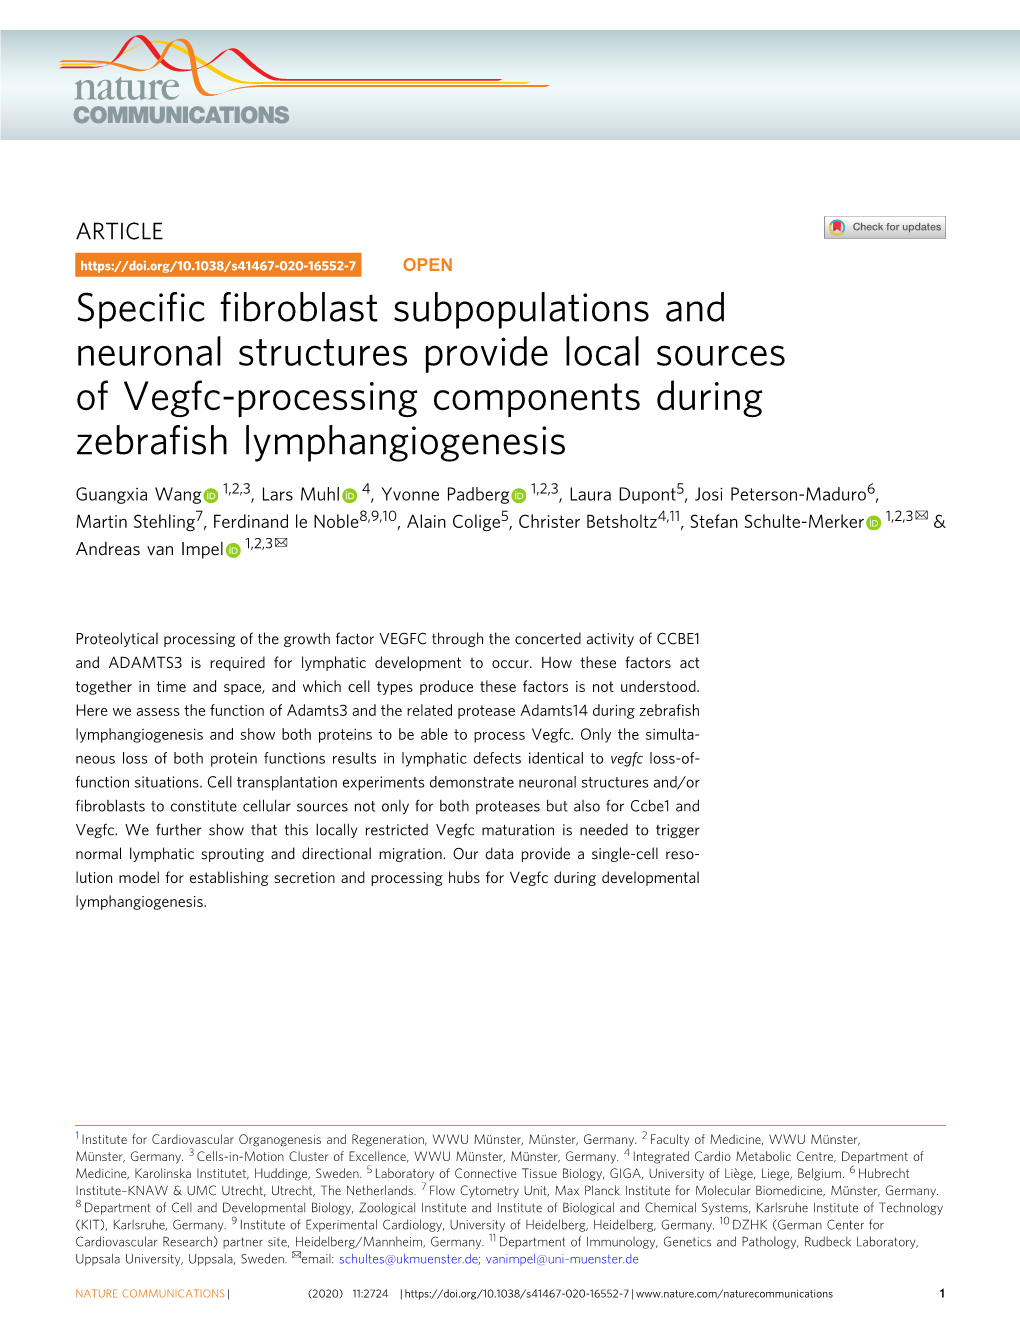 Specific Fibroblast Subpopulations and Neuronal Structures Provide Local